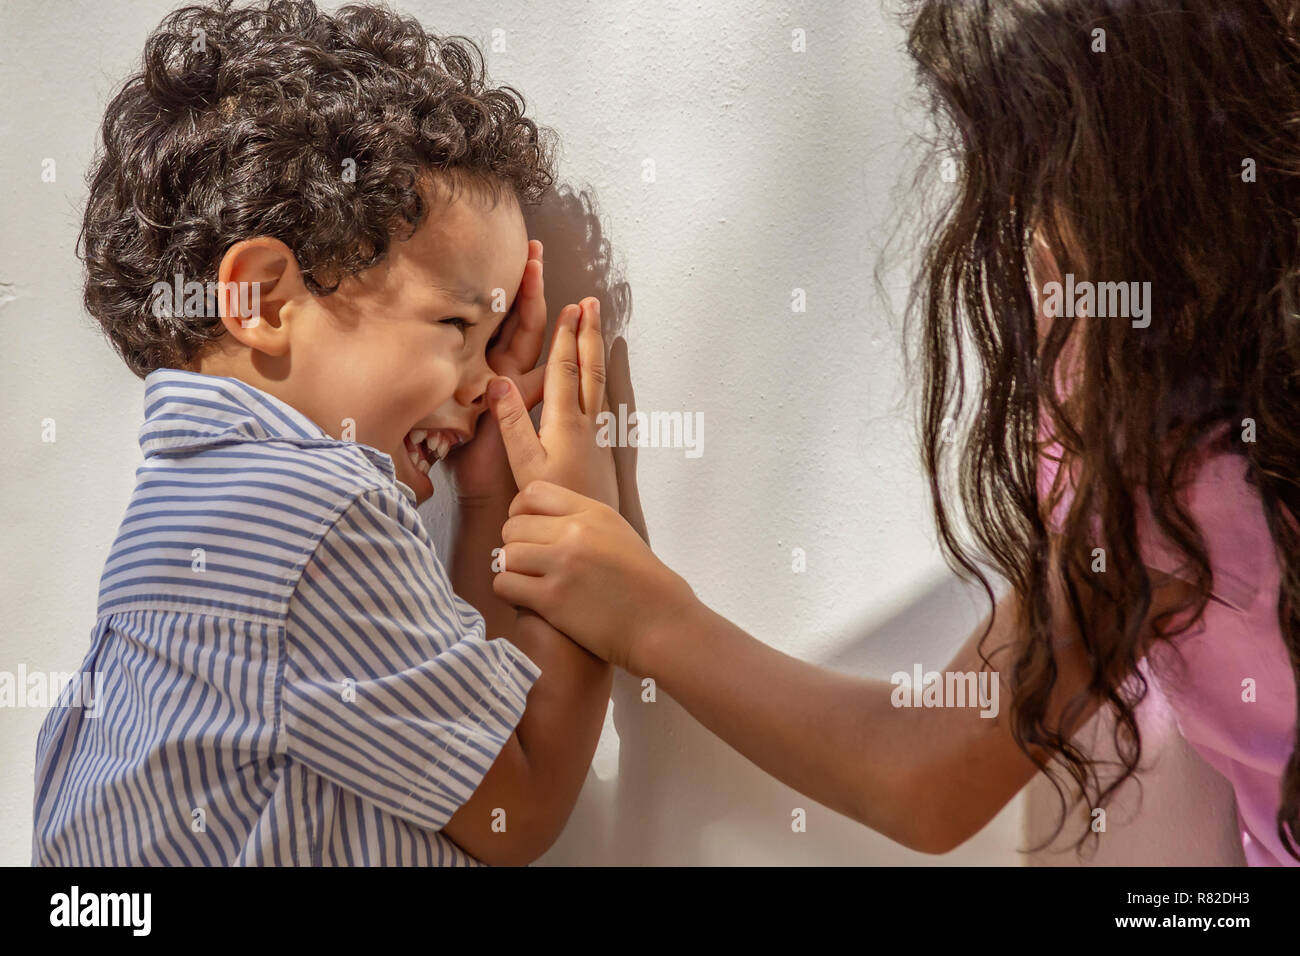 A little boy looks at his sister laughing as she grabs his arm. Playing with his older sister downtown outdoors at the community square. Stock Photo